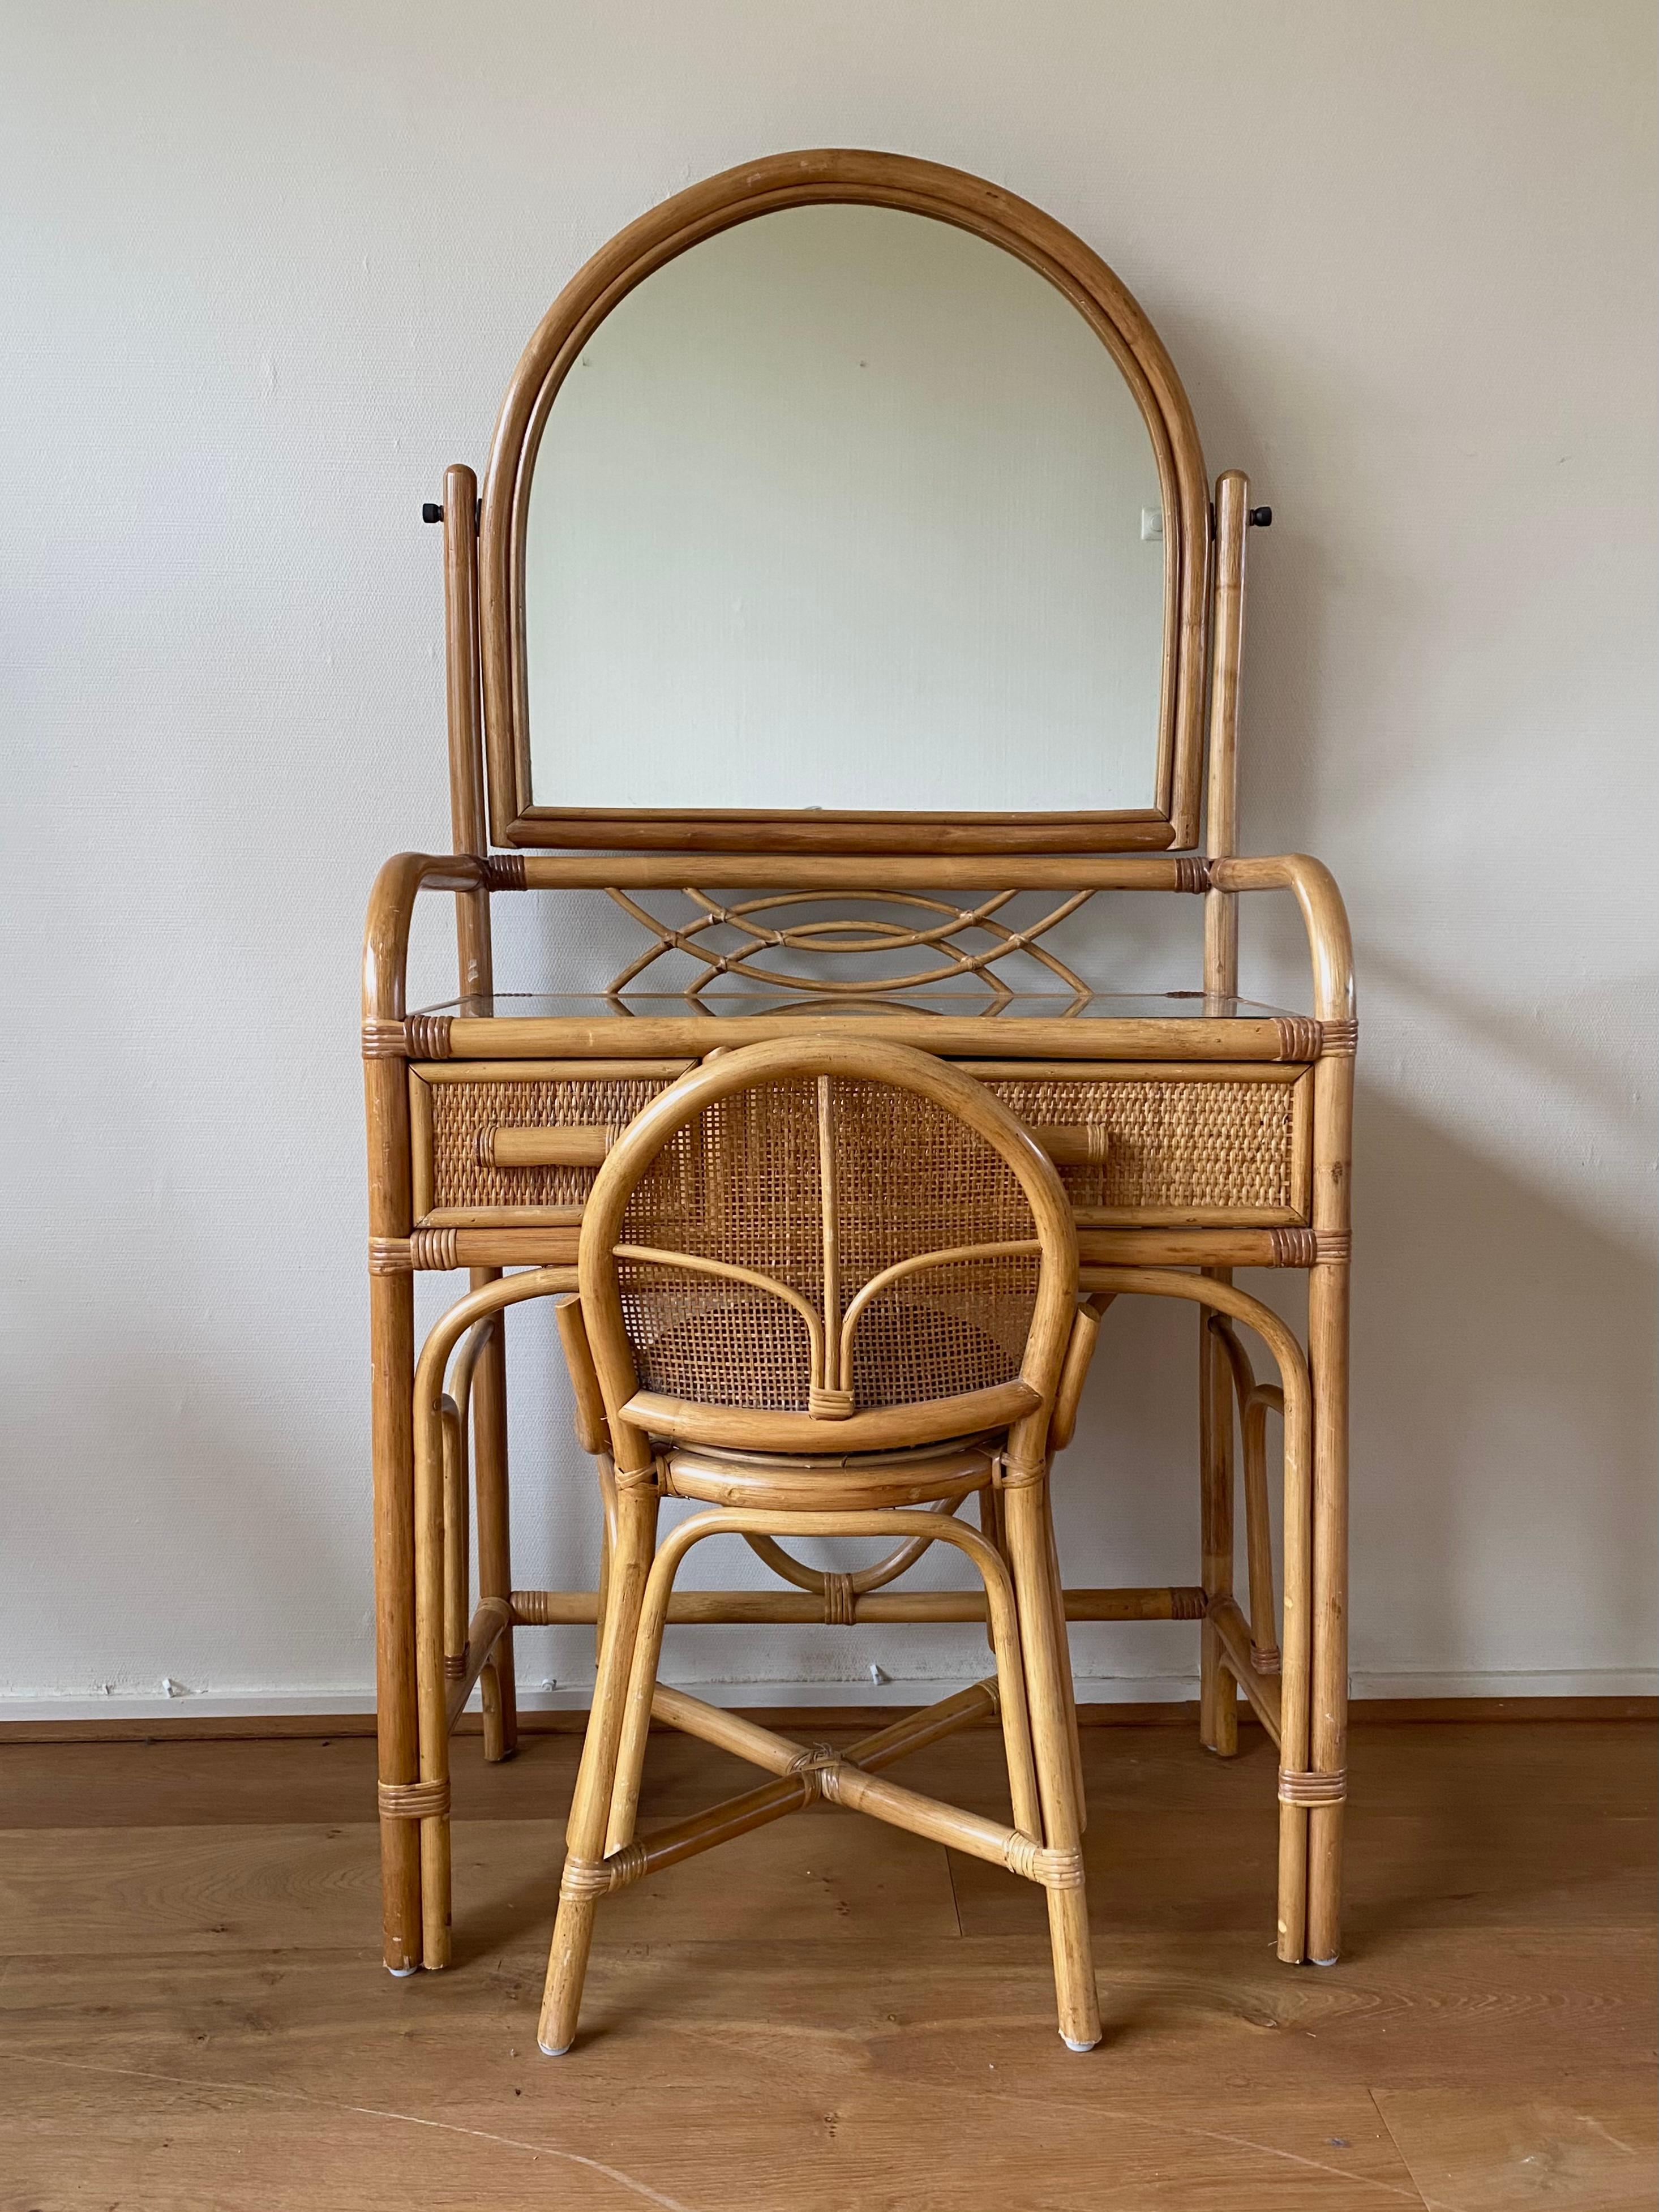 20th Century Vintage Bamboo and Rattan Make-Up, Vanity Set with Mirror and Stool